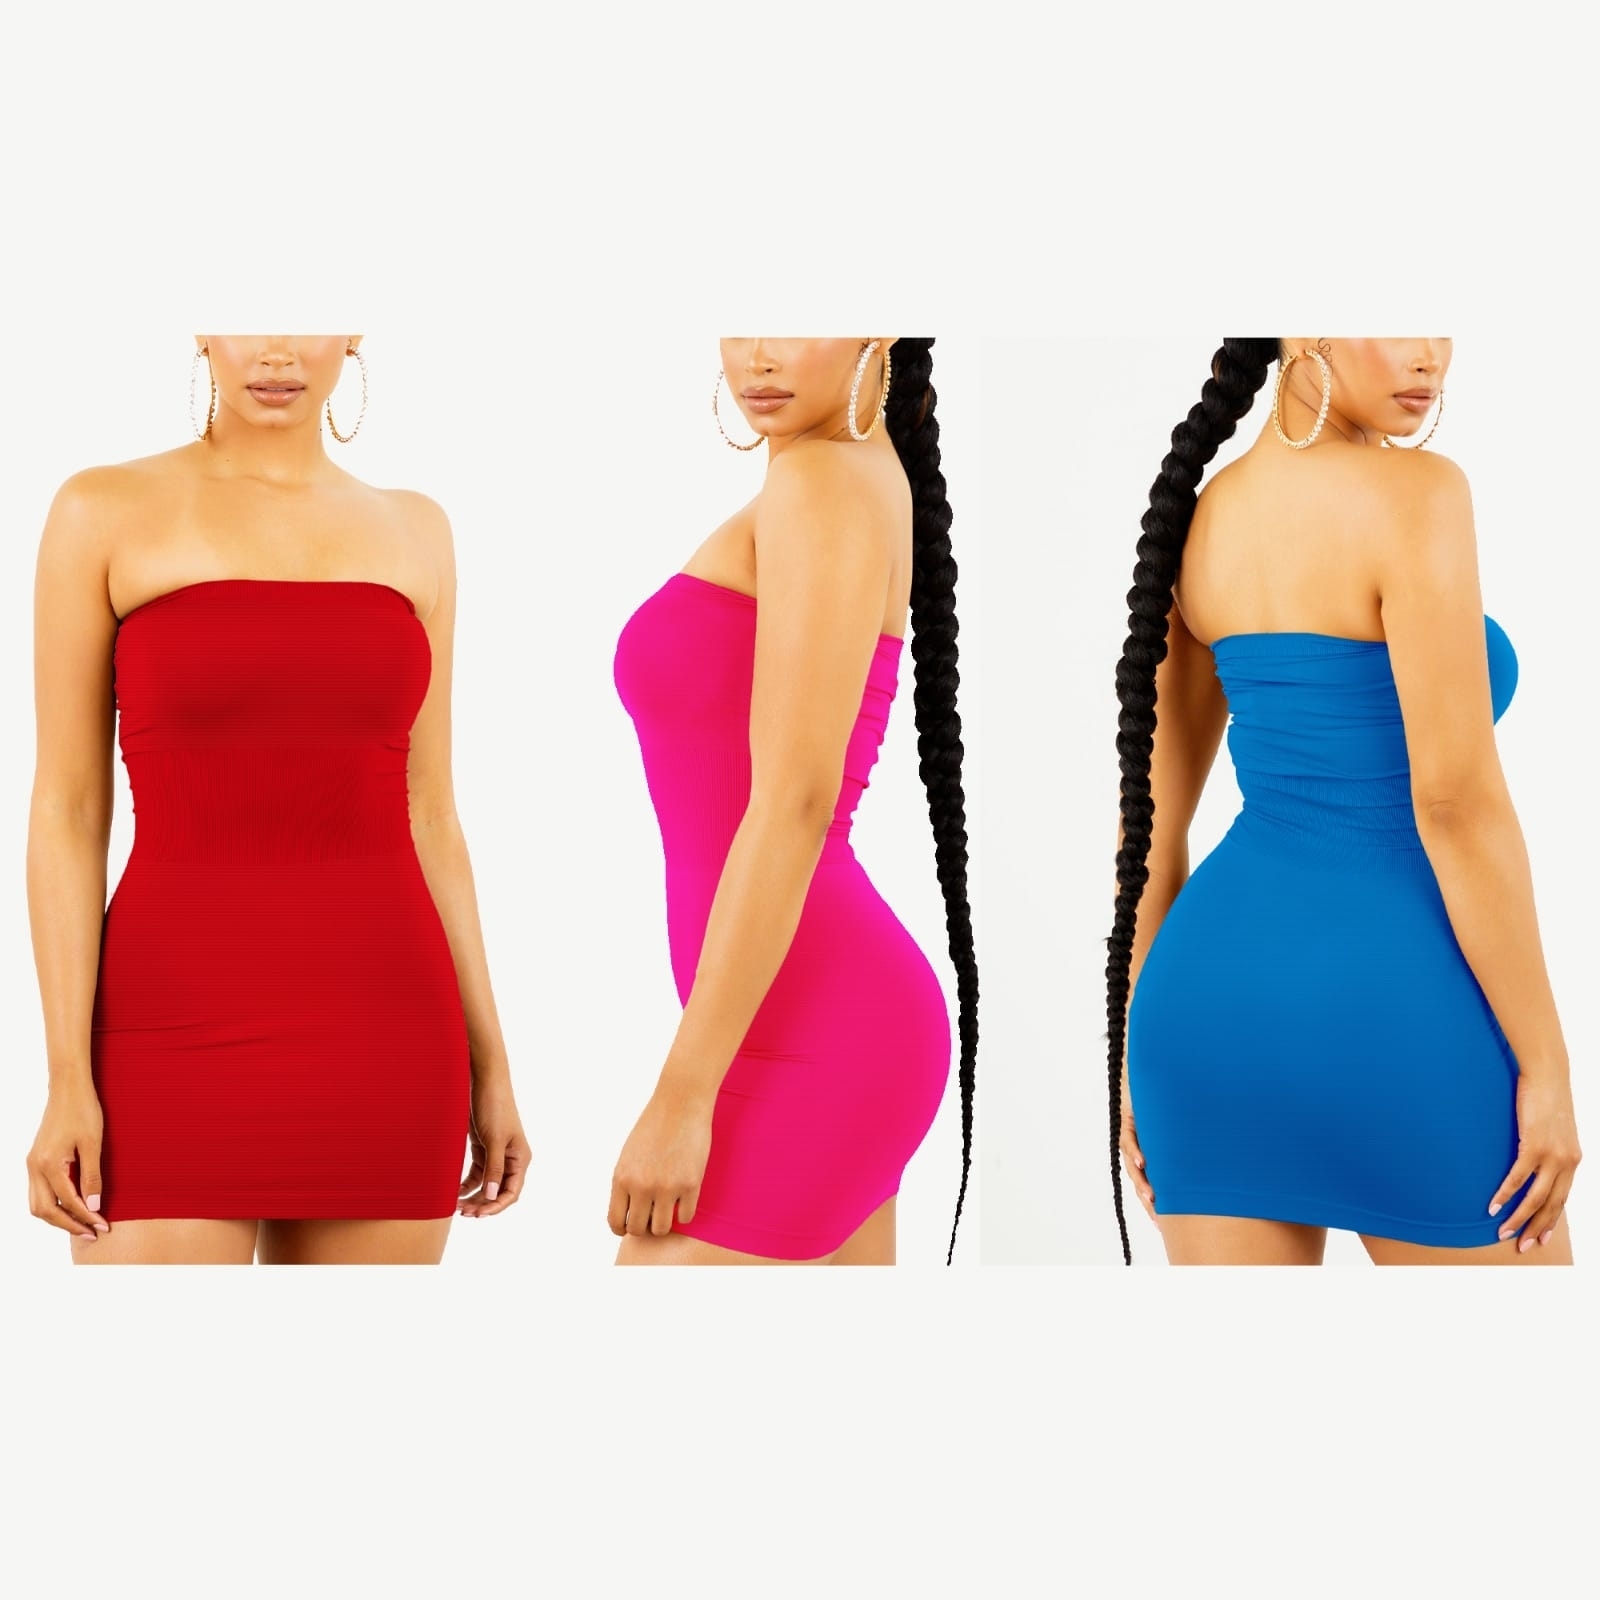 3-Pack Women's Strapless Stretchy Seamless Tight Fit Body Con Mini Tube Top Dress - BLUE, 1XL